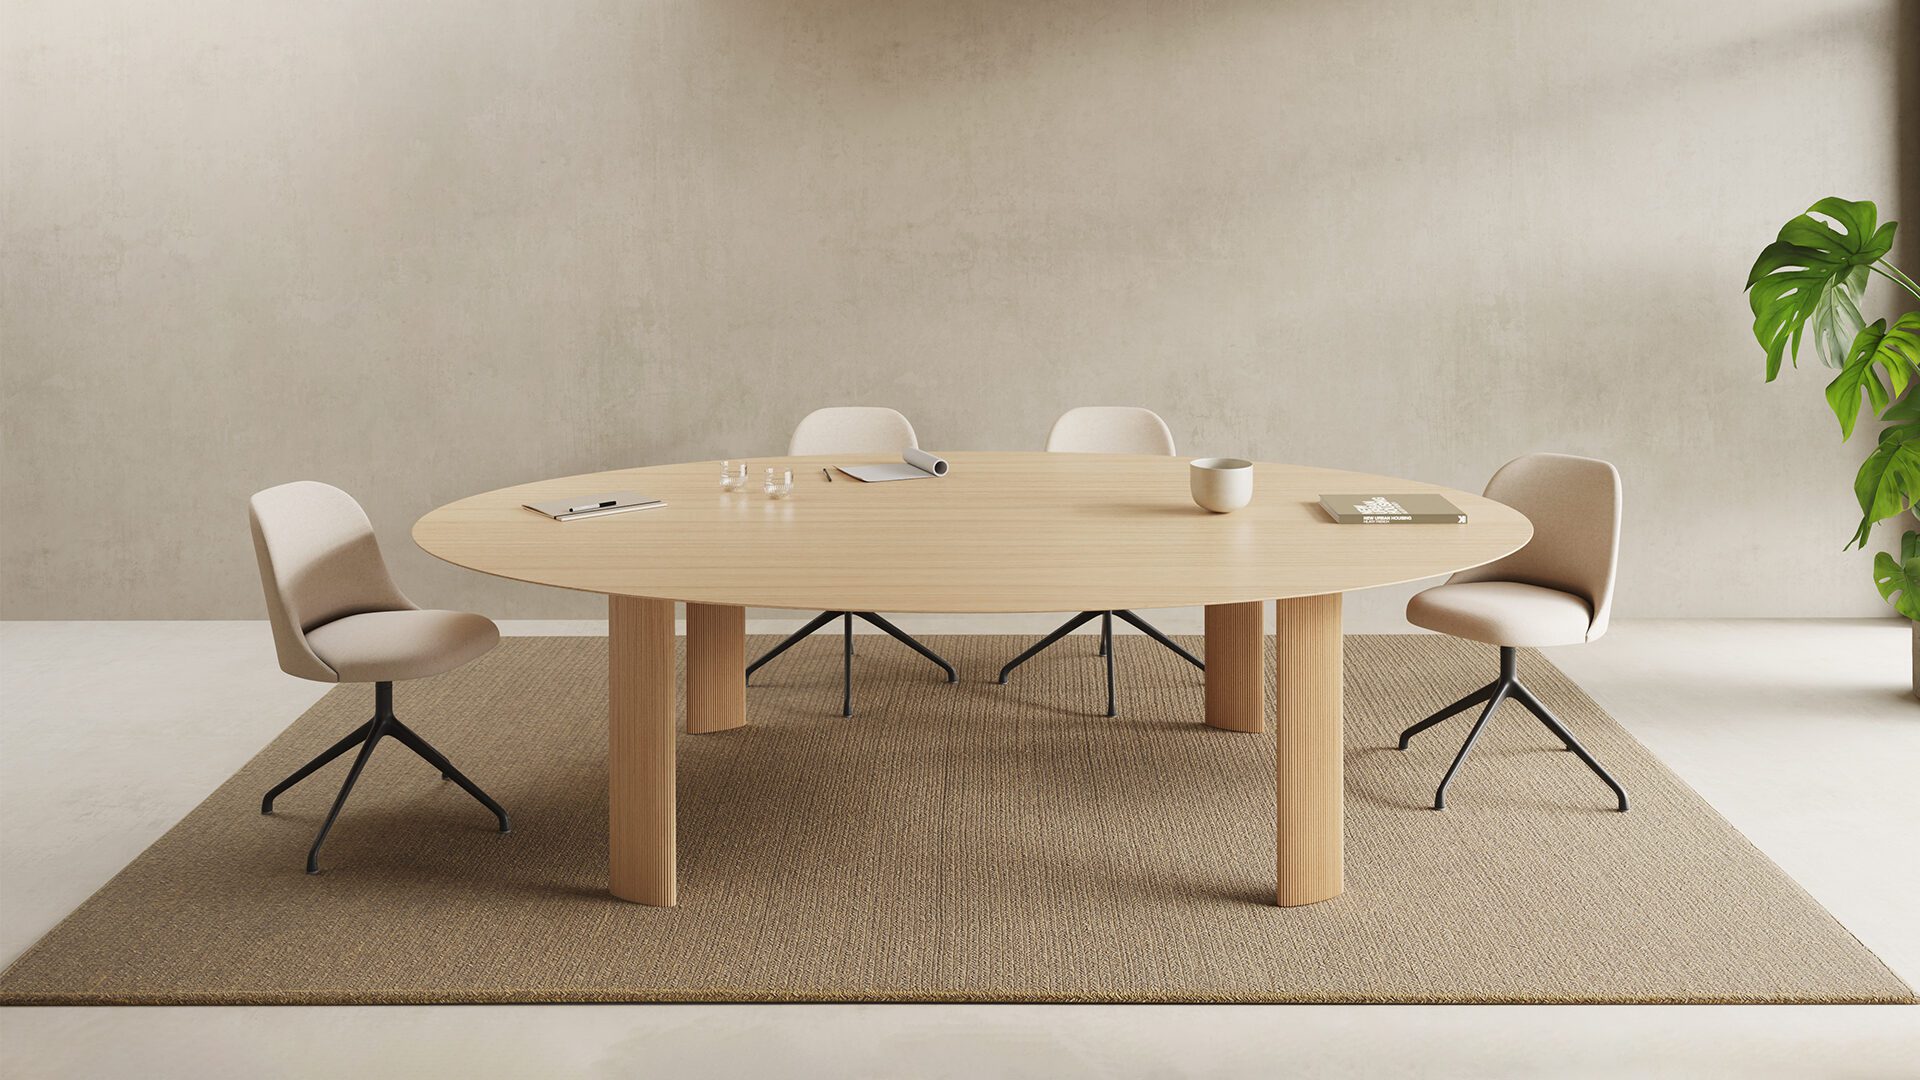 Viccarbe  We manufacture contemporary furniture for collaborative spaces